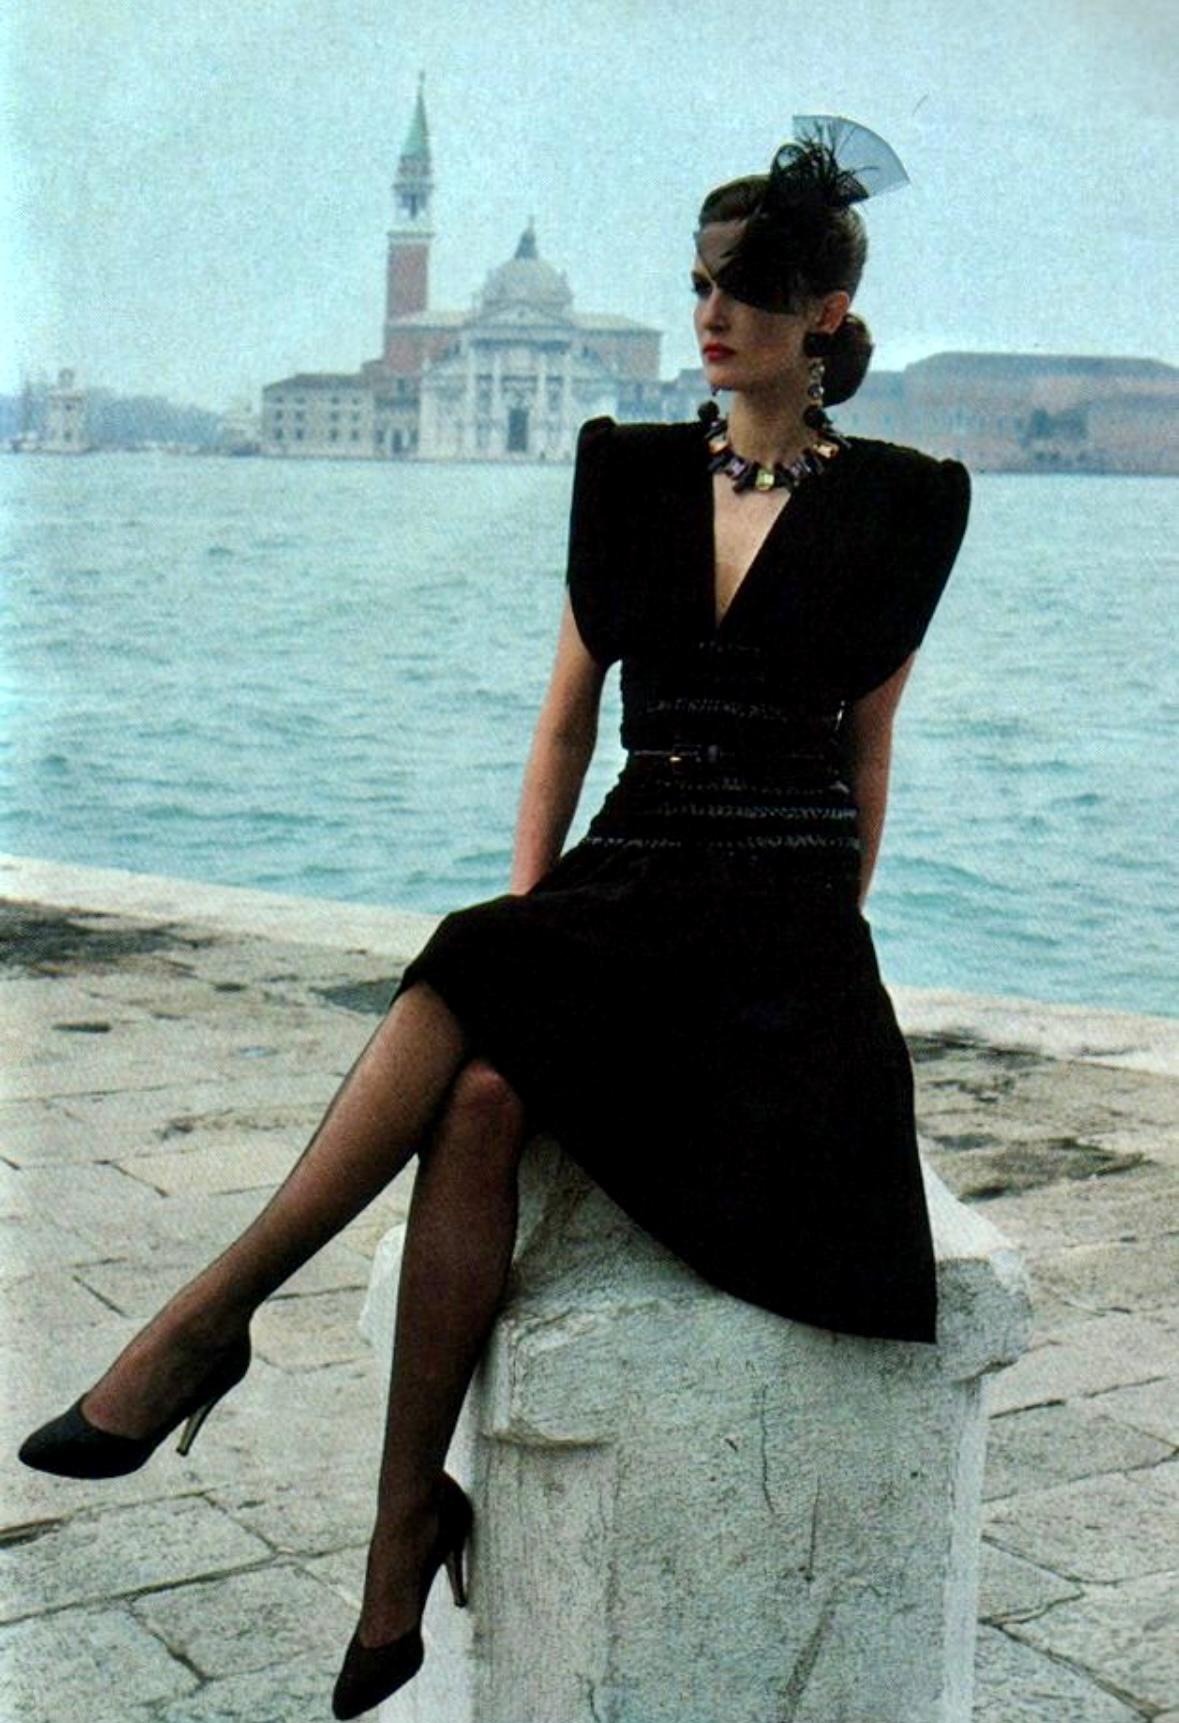 TheRealList presents: a fabulous black Saint Laurent Rive Gauche ruched dress, designed by Yves Saint Laurent. From the Fall/Winter 1983 collection, this fabulous dress was highlighted in the season's ad campaign, captured by Helmut Newton in